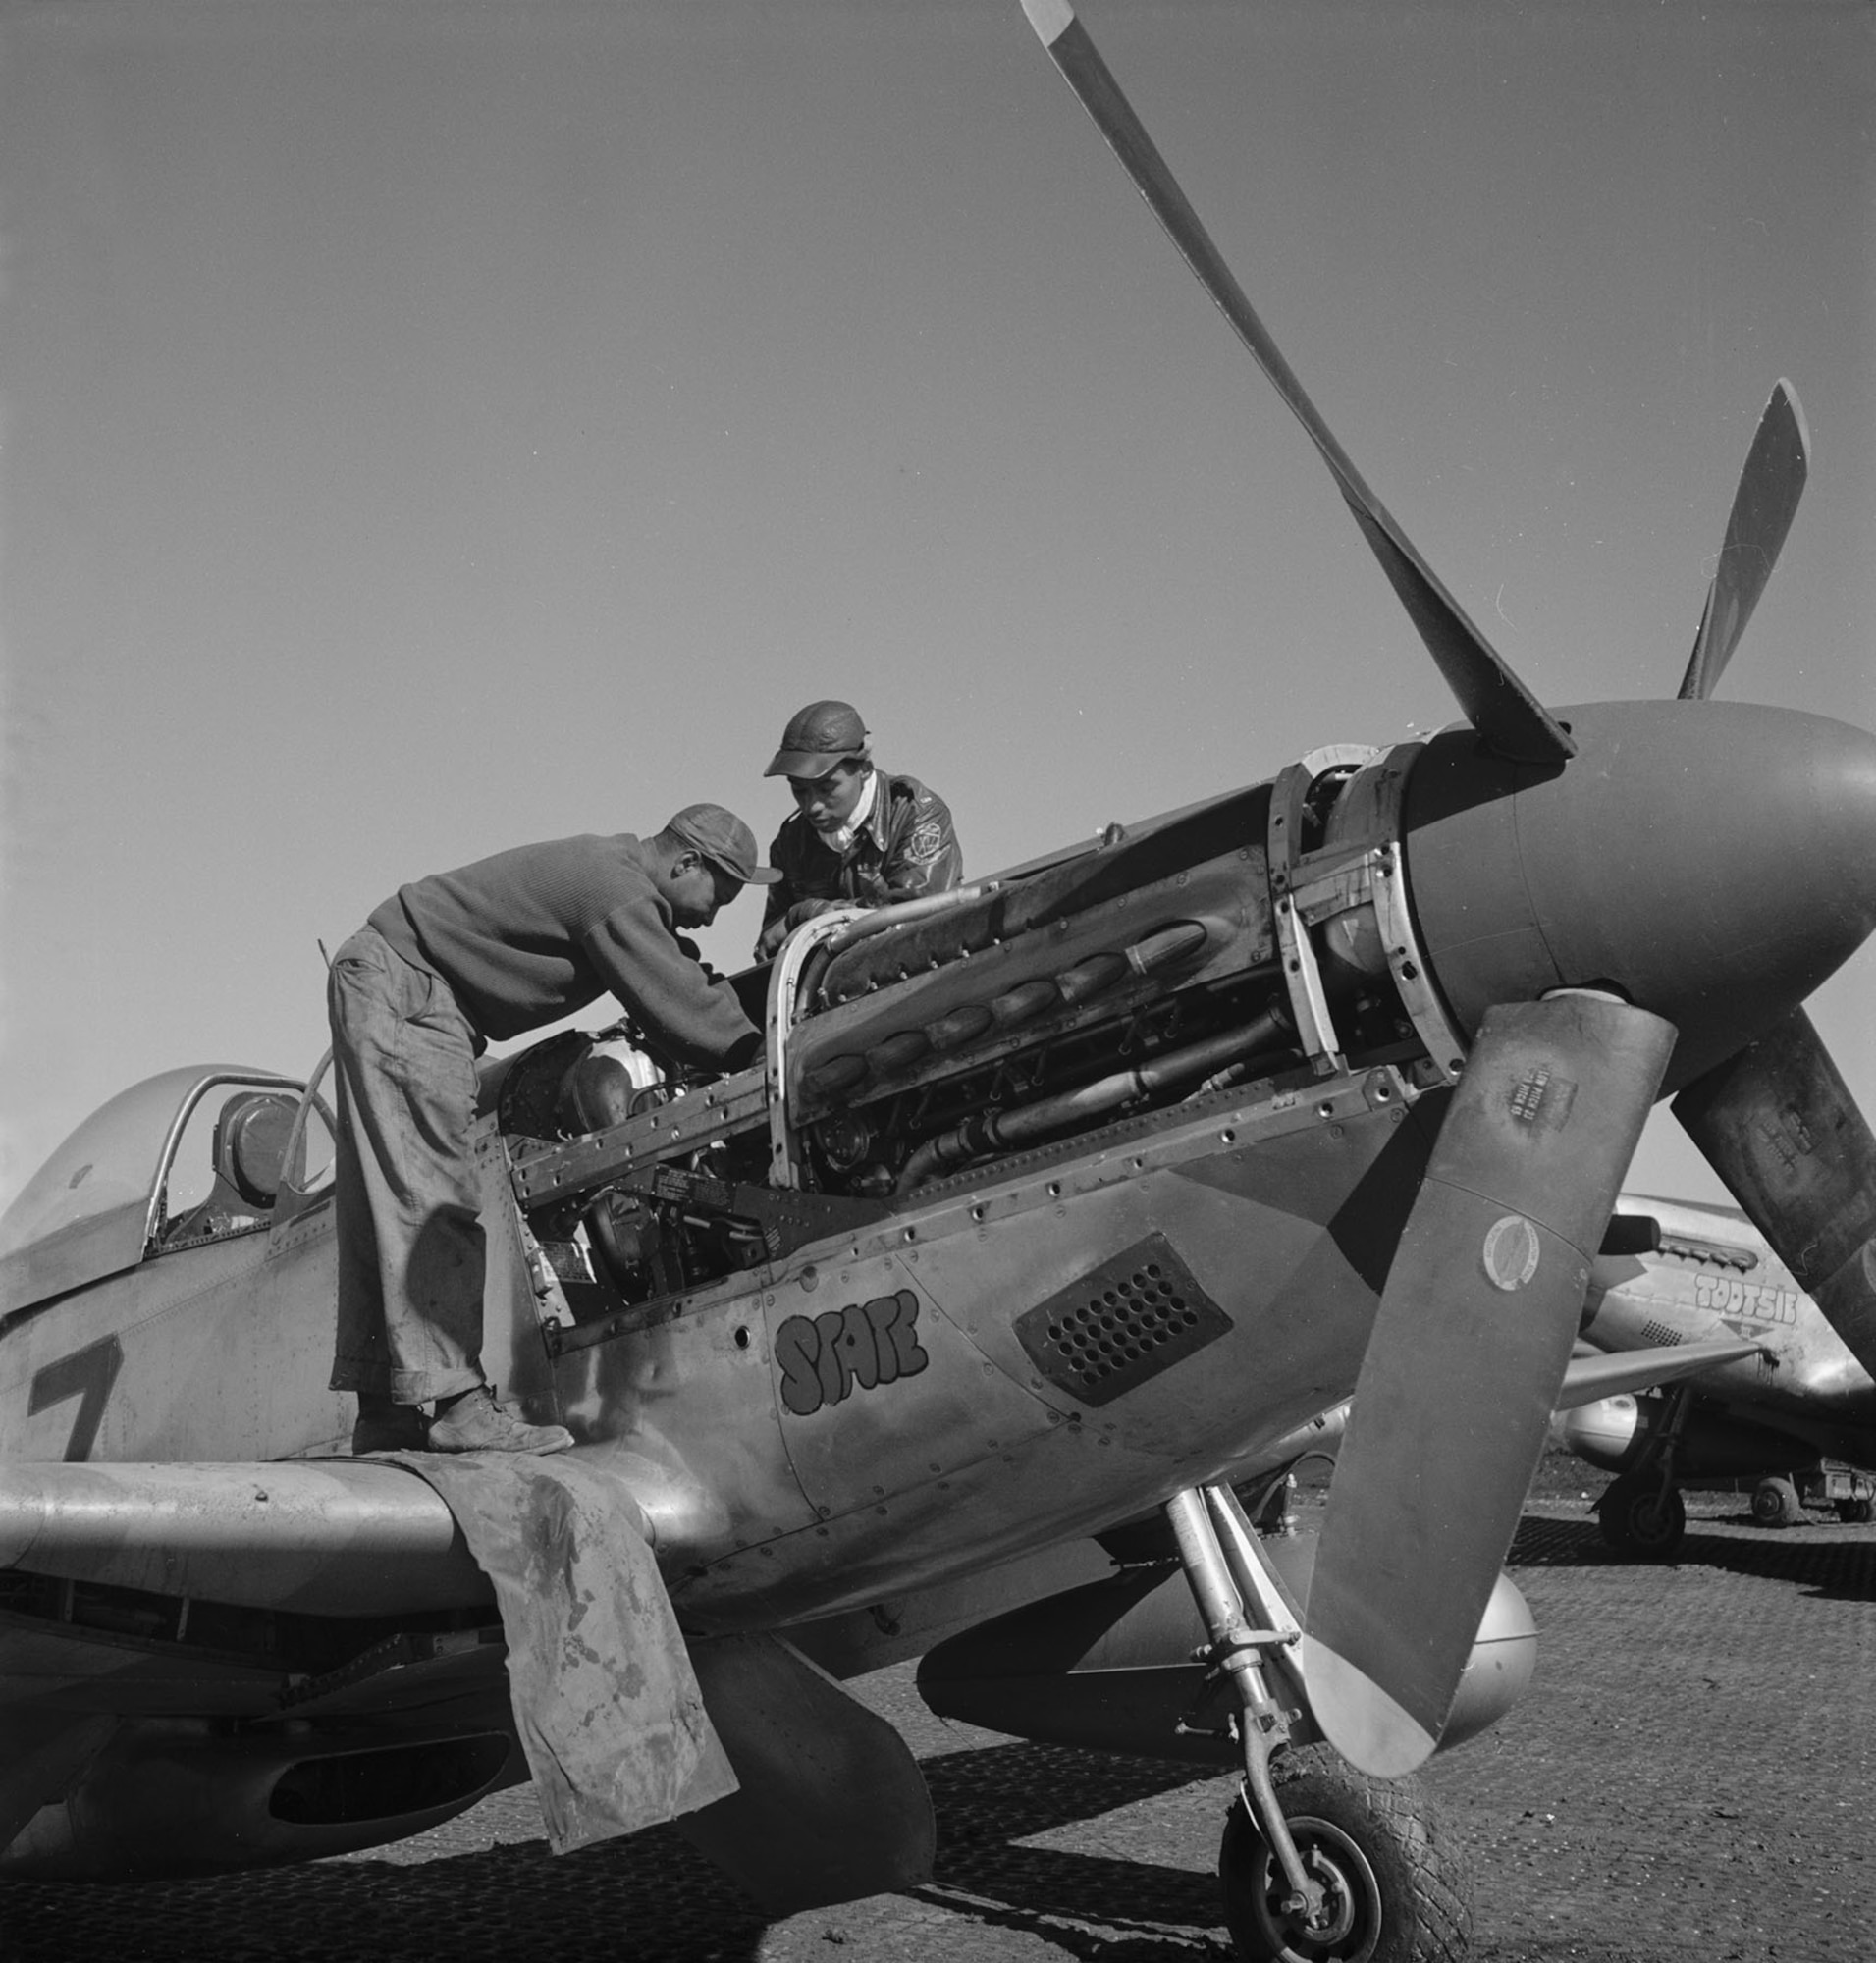 1st Lt. Roscoe Brown Jr. (right) and crew chief Marcellus G. Smith working on the engine of a 100th Fighter Squadron P-51 Mustang. On March 24, 1945, Brown shot down a German Me 262 jet fighter. (U.S. Air Force photo)